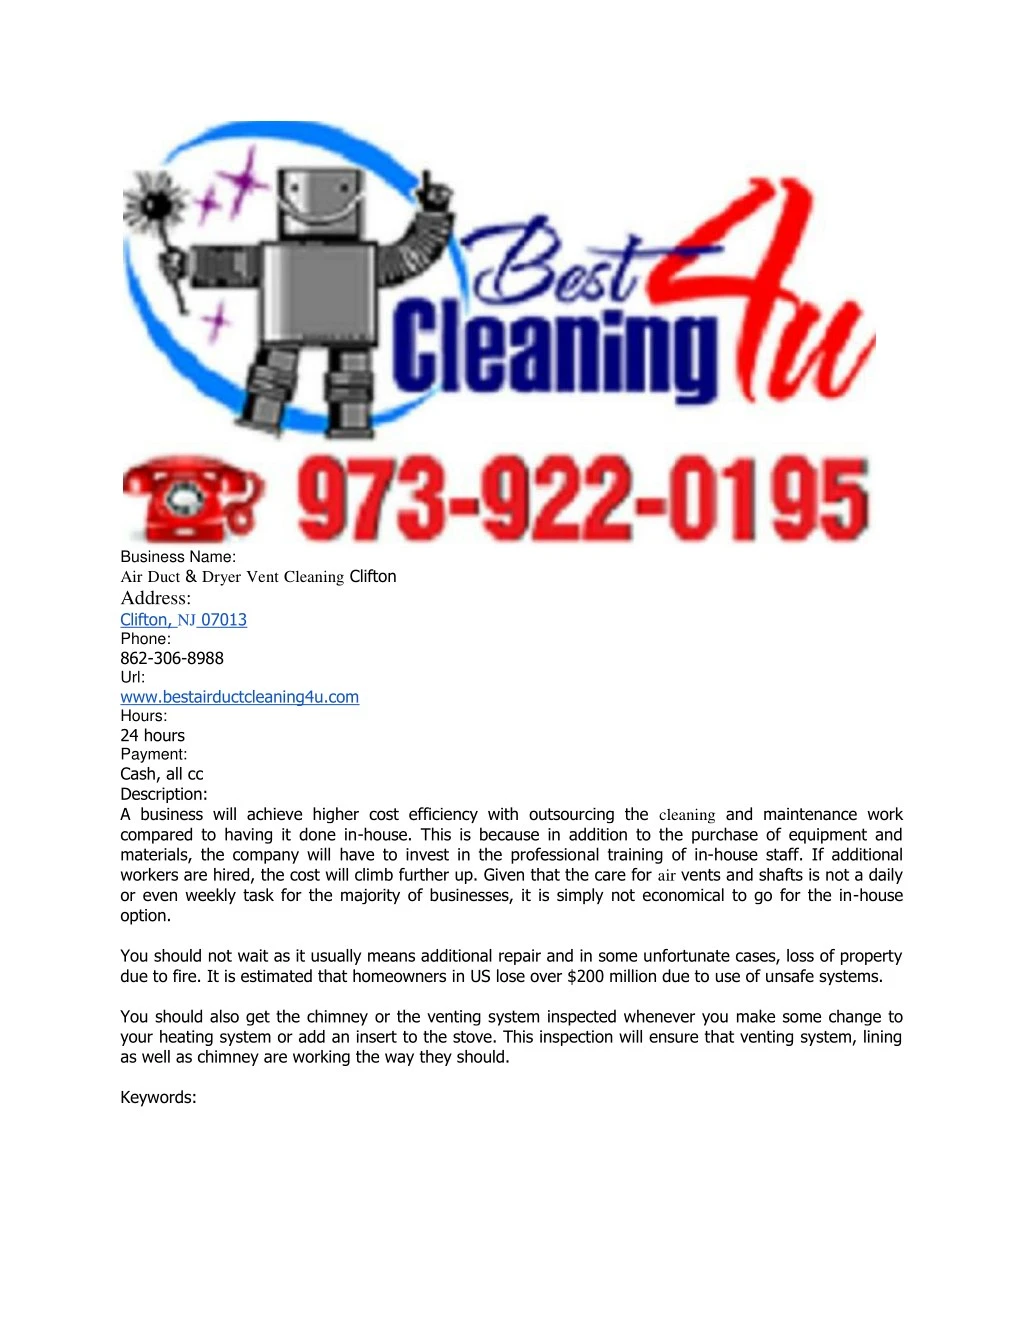 business name air duct dryer vent cleaning